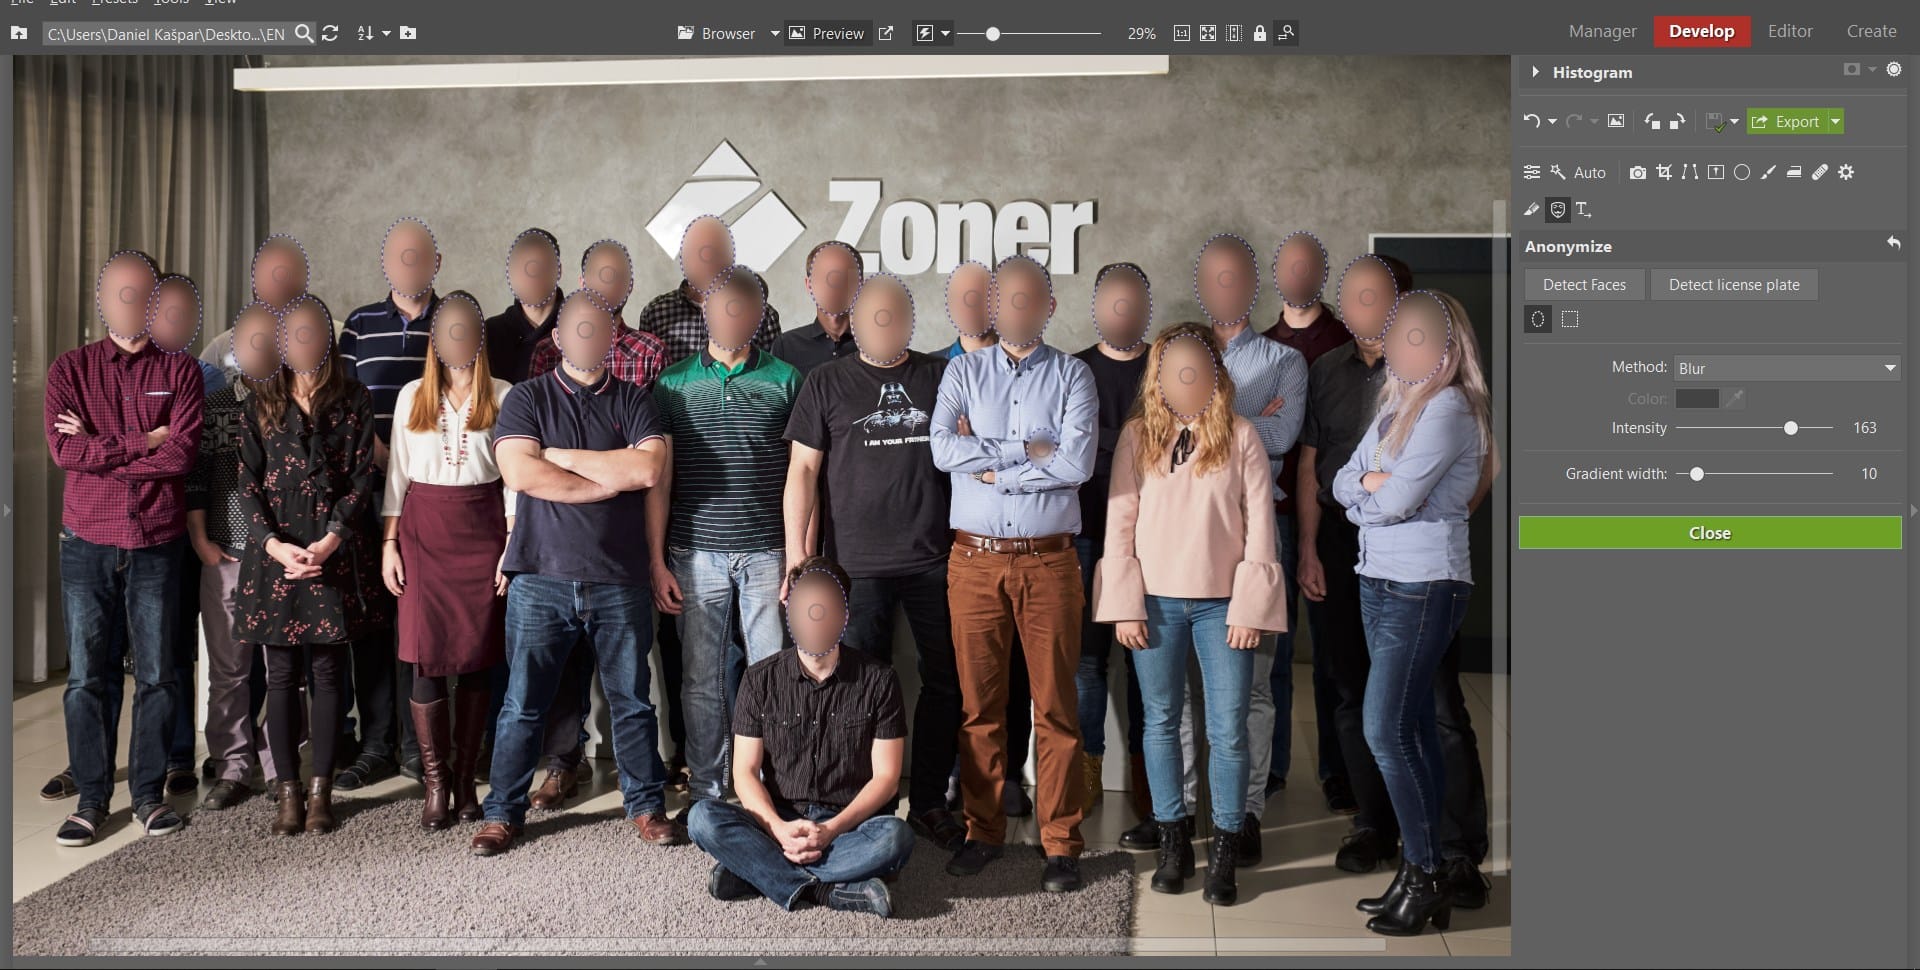 How to Hide Faces and License Plates: Learn to Use Anonymization